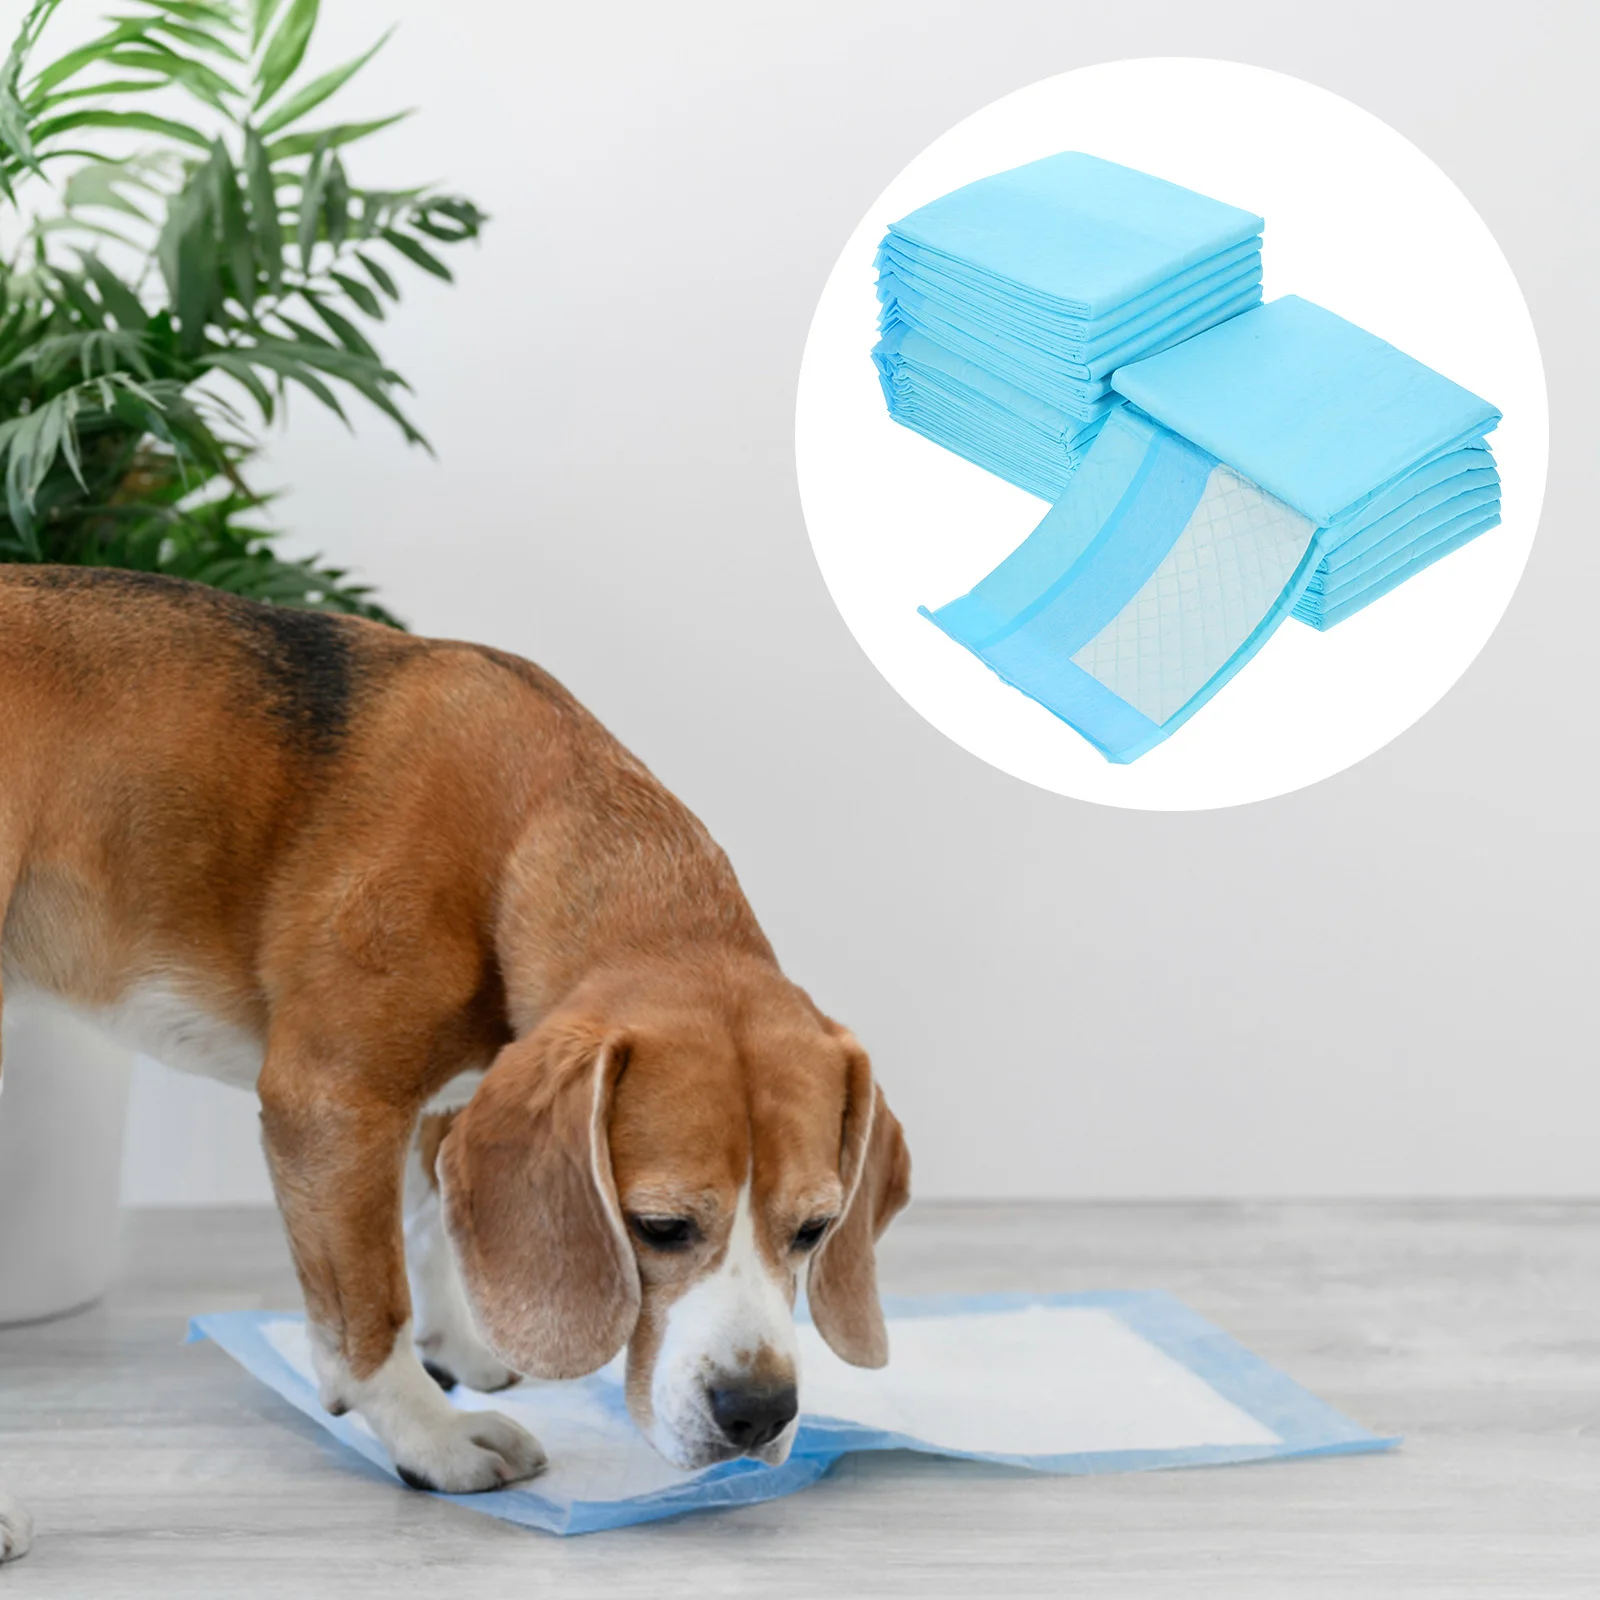 

40 Pcs Super Absorbent Waterproof Dog Pads Puppy Pet Training The Cat Changing Mat Pee For Non-woven Fabric Supplies